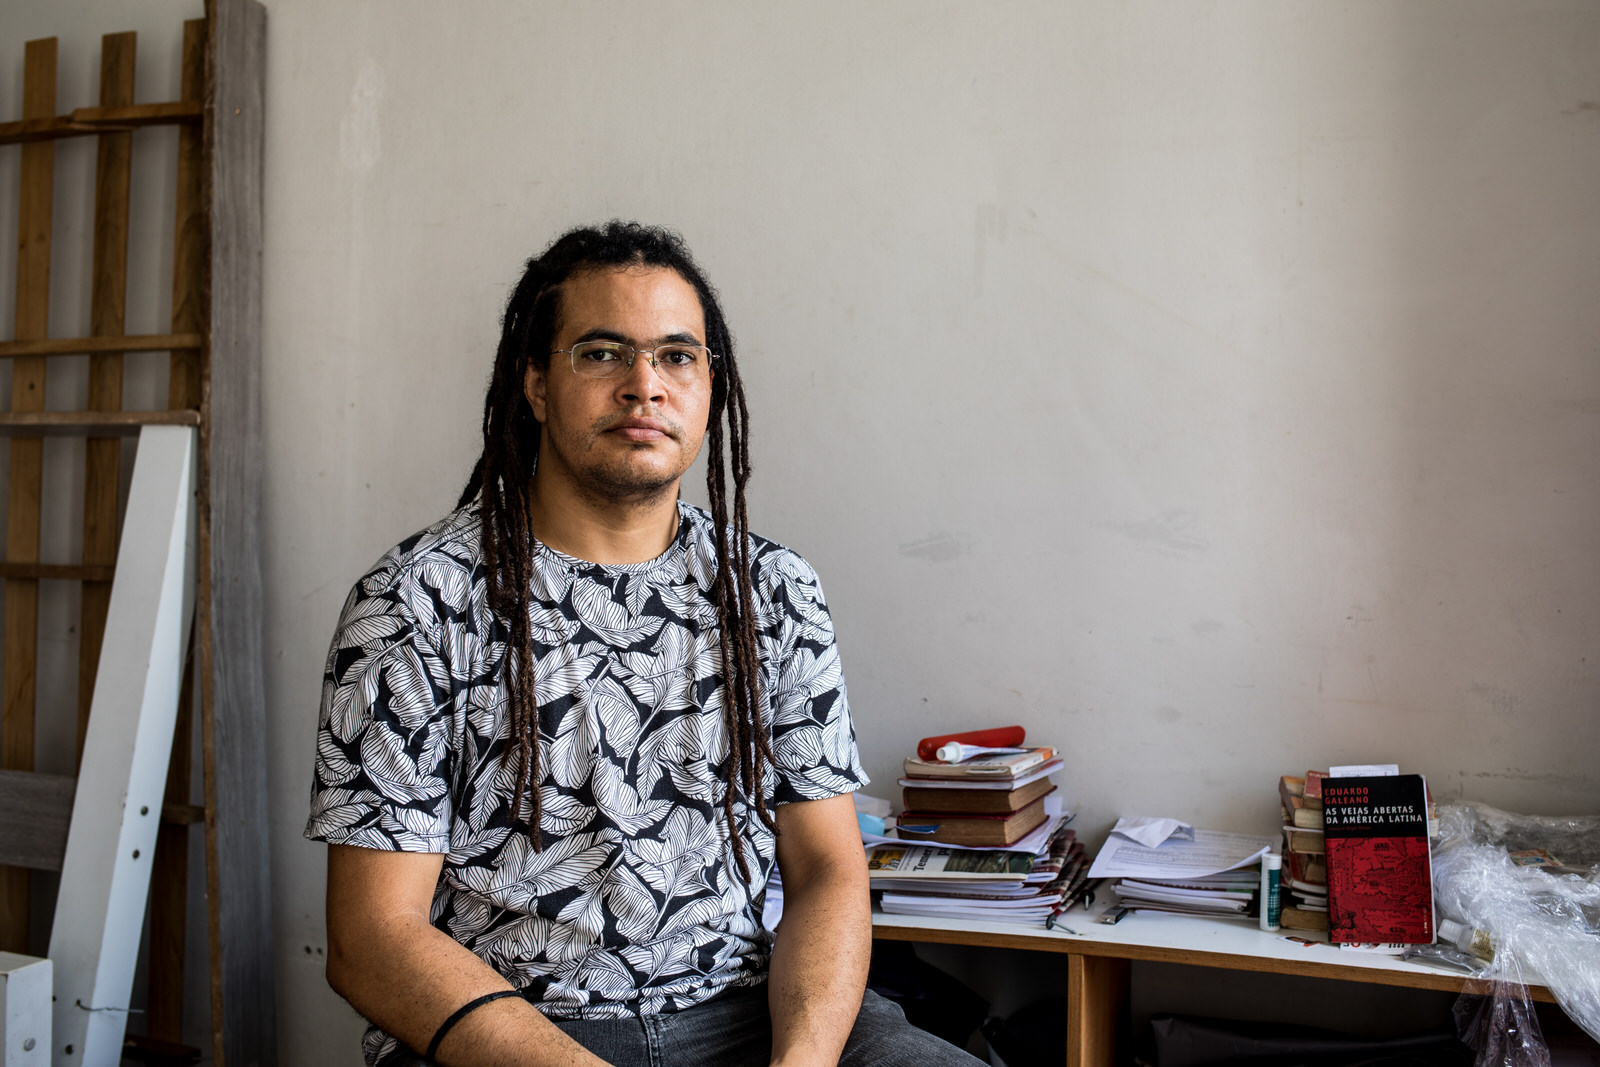  Wagner Moreira a leader from the MSTB social movement (Movimento Sem Teto da Bahia -  Homeless Movement of Bahia ) in his room in the occupation. 